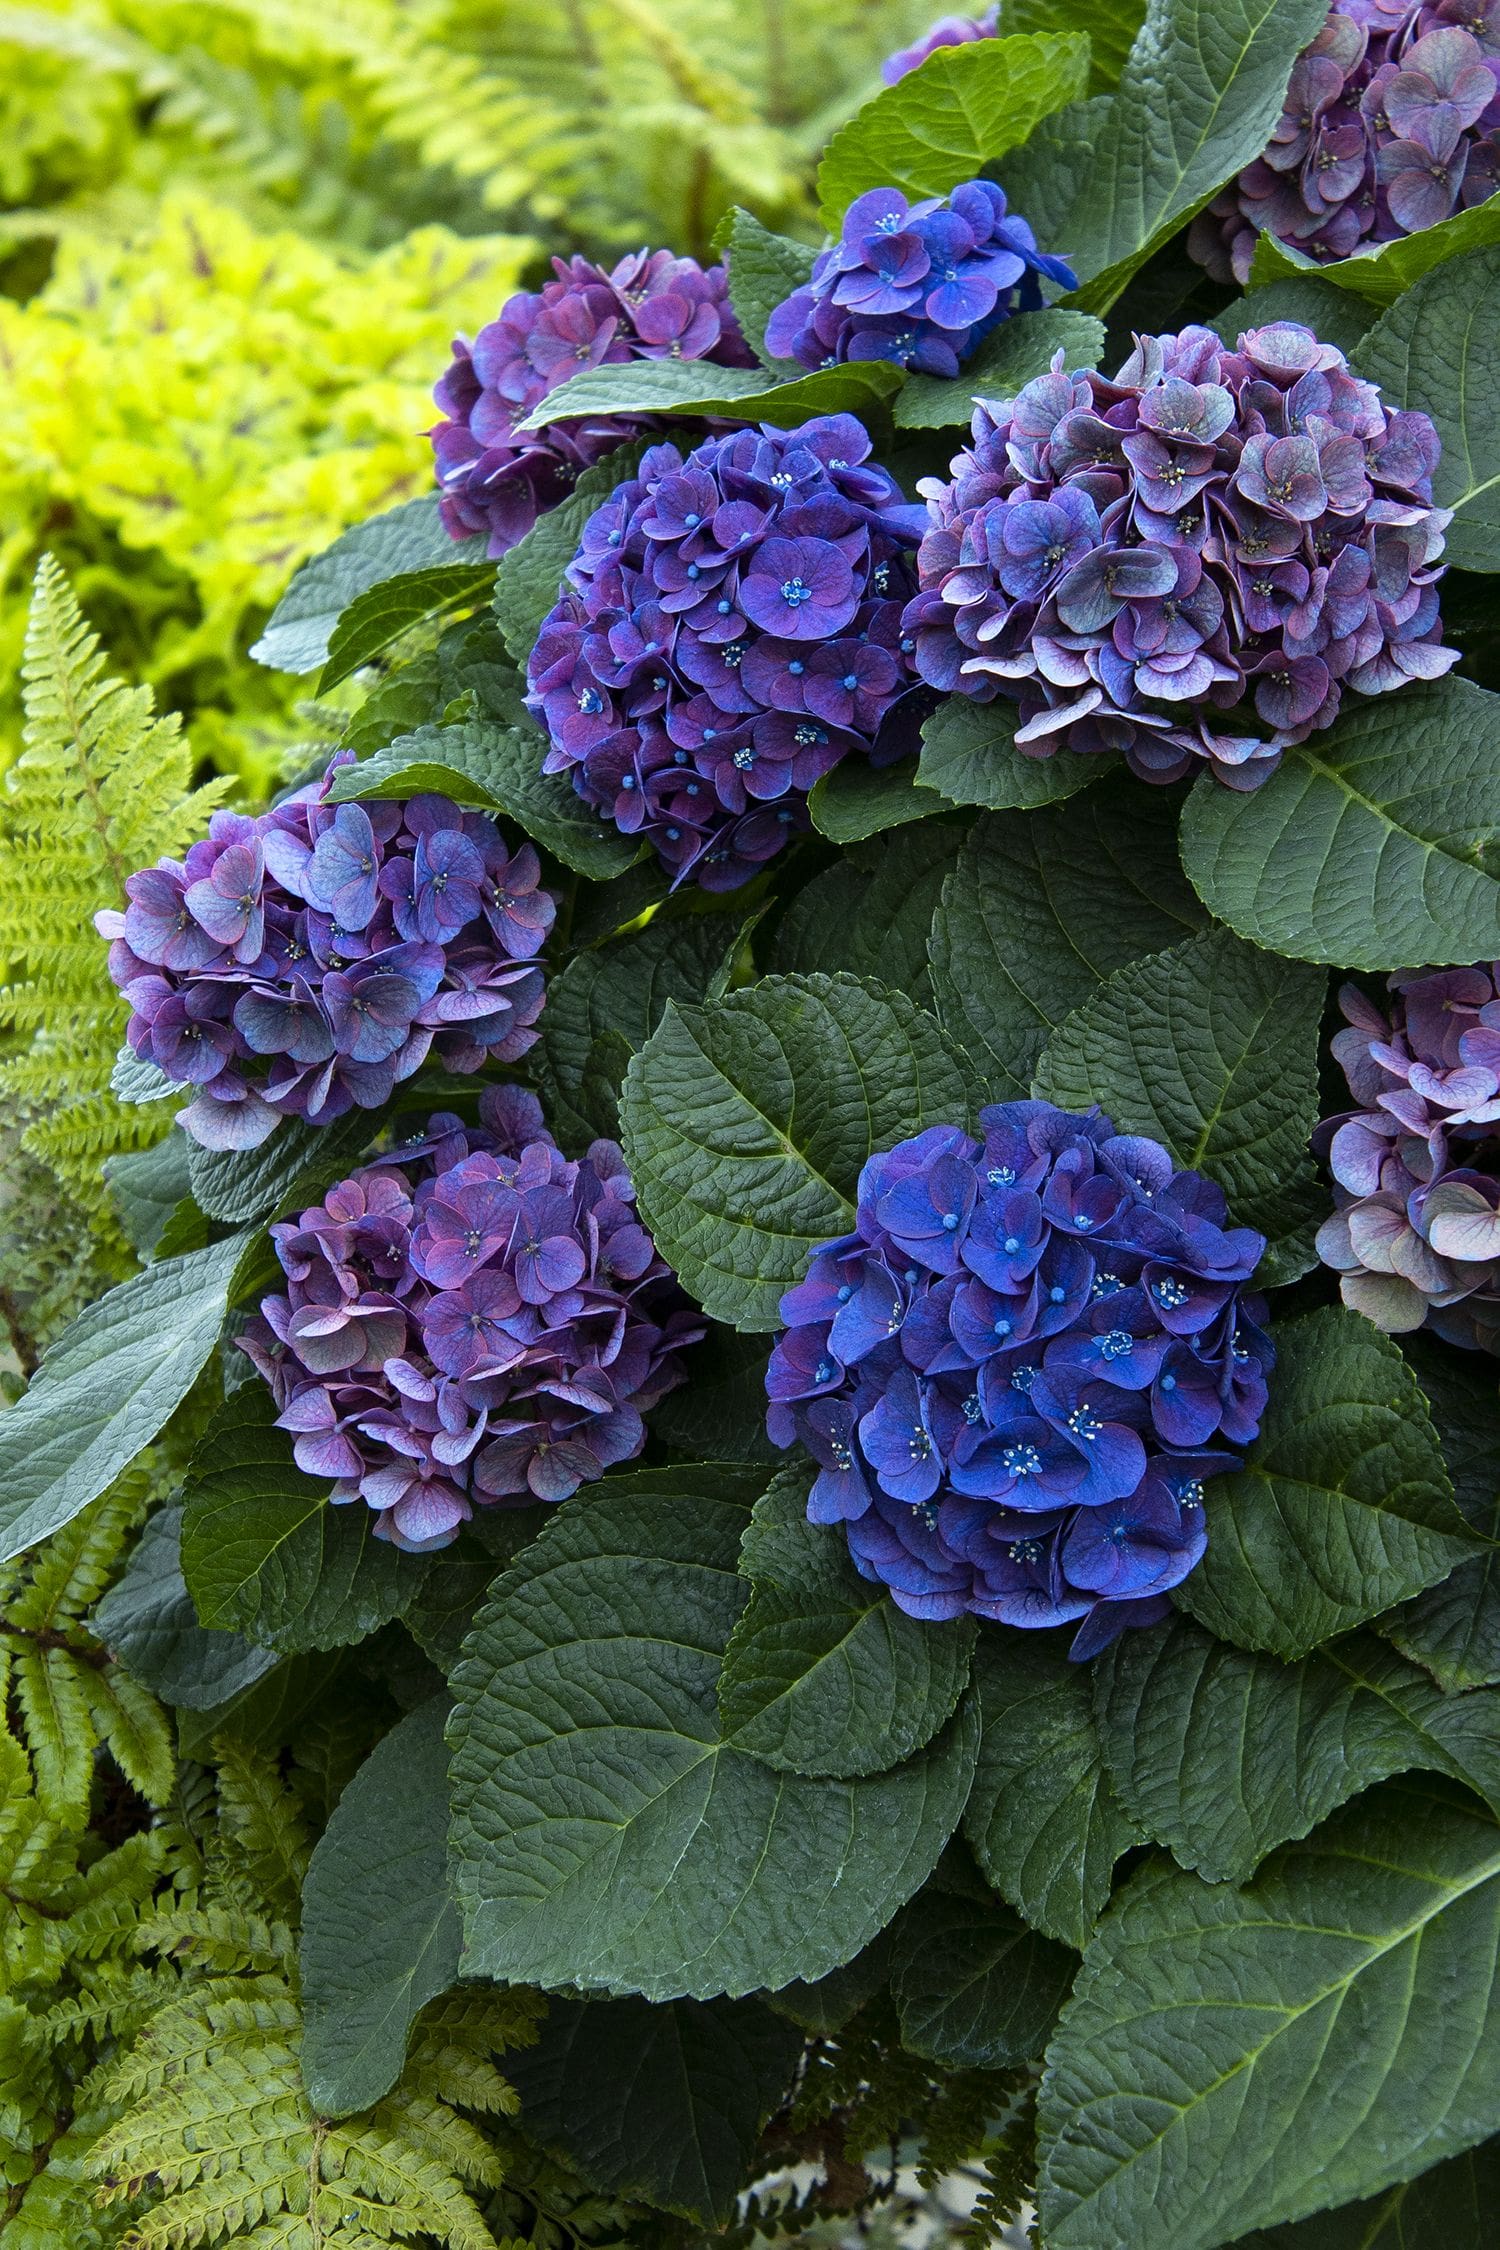 Seaside Serenade Hydrangeas: The Showstopping Blooms That Will Make ...